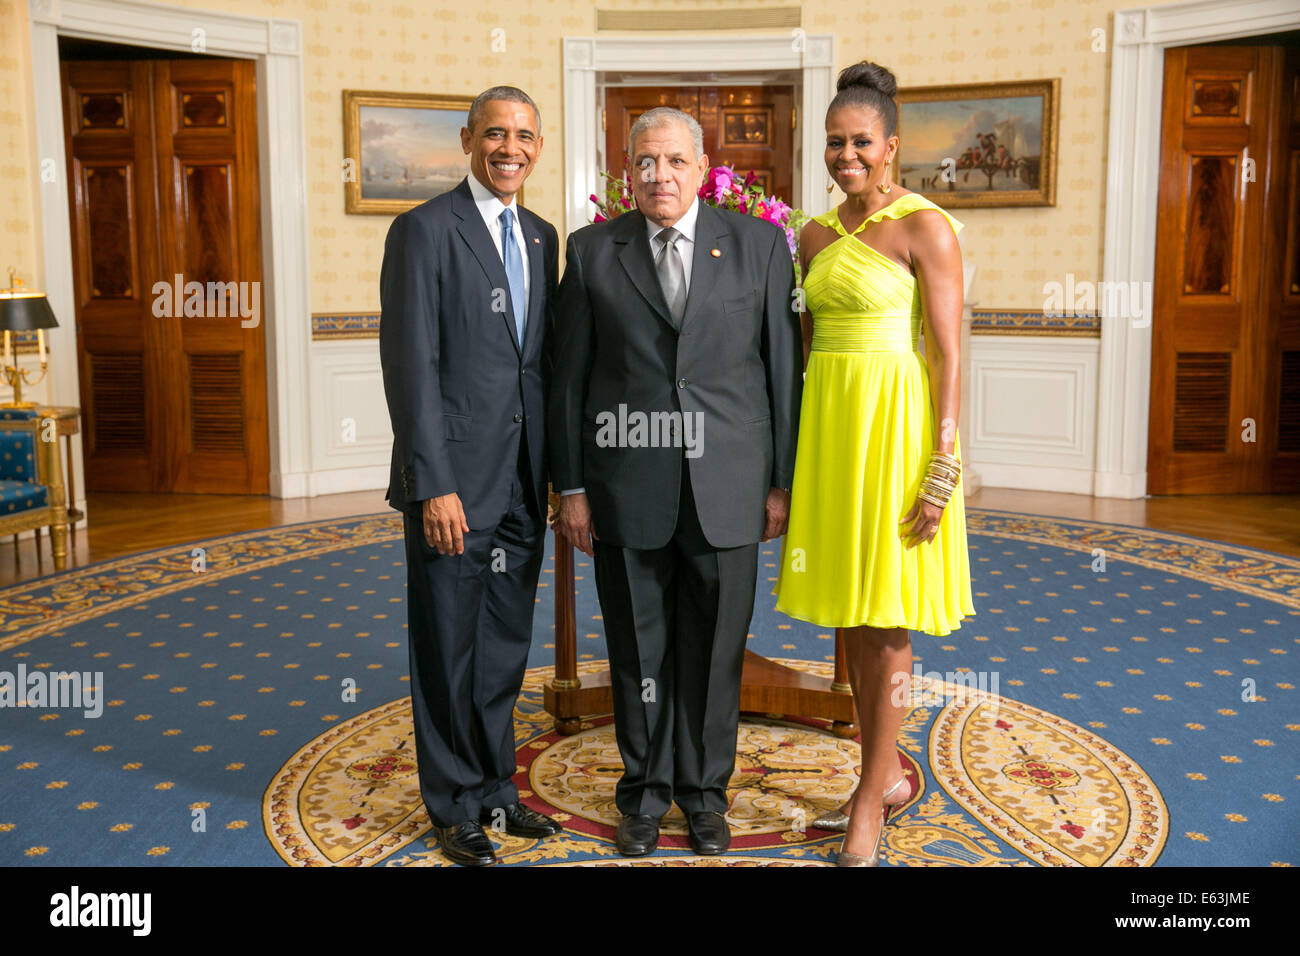 President Barack Obama and First Lady Michelle Obama greet His Excellency Ibrahim Roshdy Mahlab, Prime Minister of the Arab Republic of Egypt, in the Blue Room during a U.S.-Africa Leaders Summit dinner at the White House, Aug. 5, 2014. (Official White Ho Stock Photo